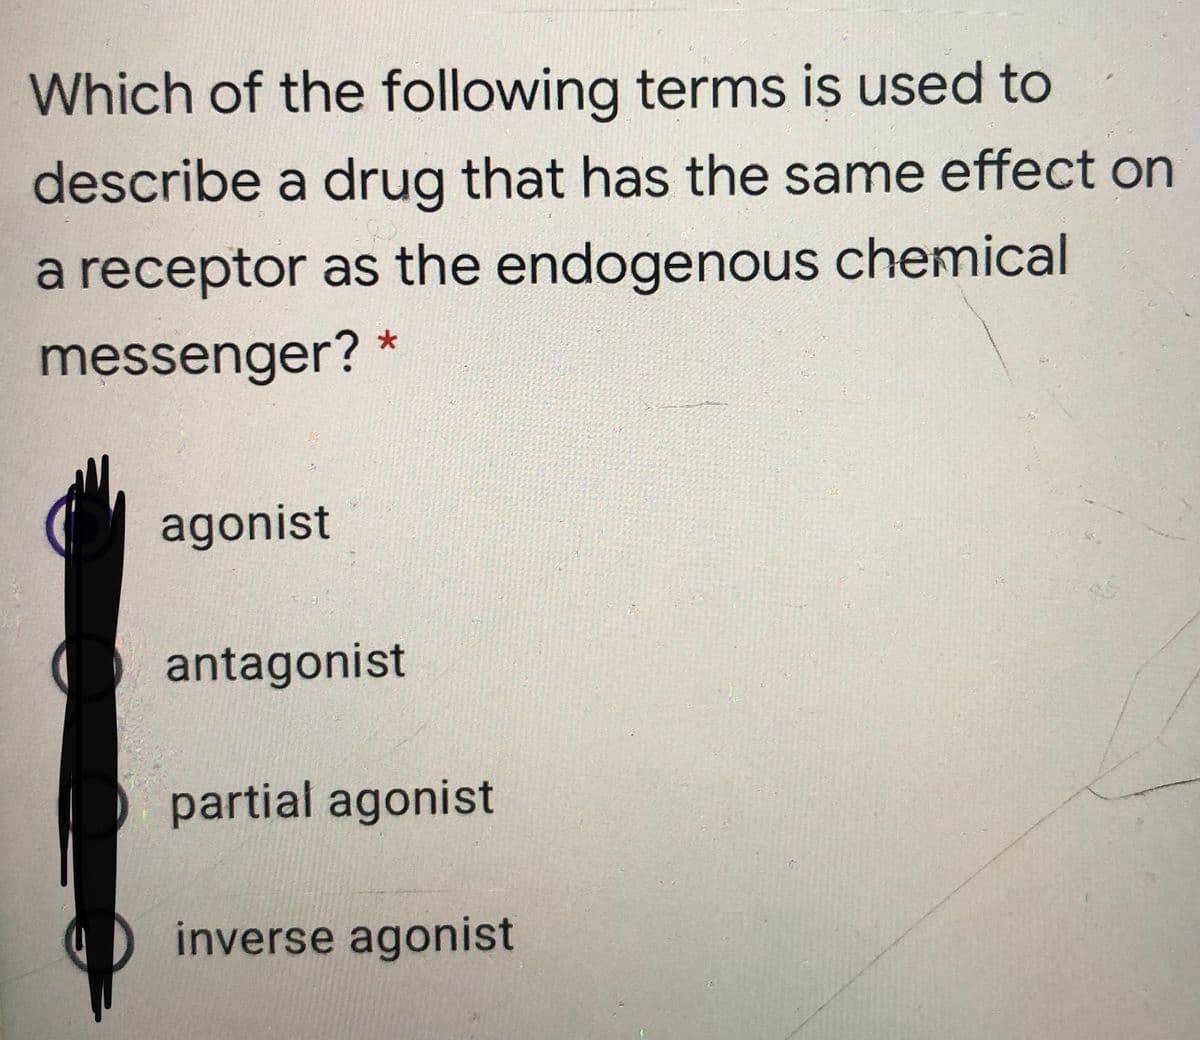 Which of the following terms is used to
describe a drug that has the same effect on
a receptor as the endogenous chemical
messenger?
agonist
antagonist
partial agonist
inverse agonist
